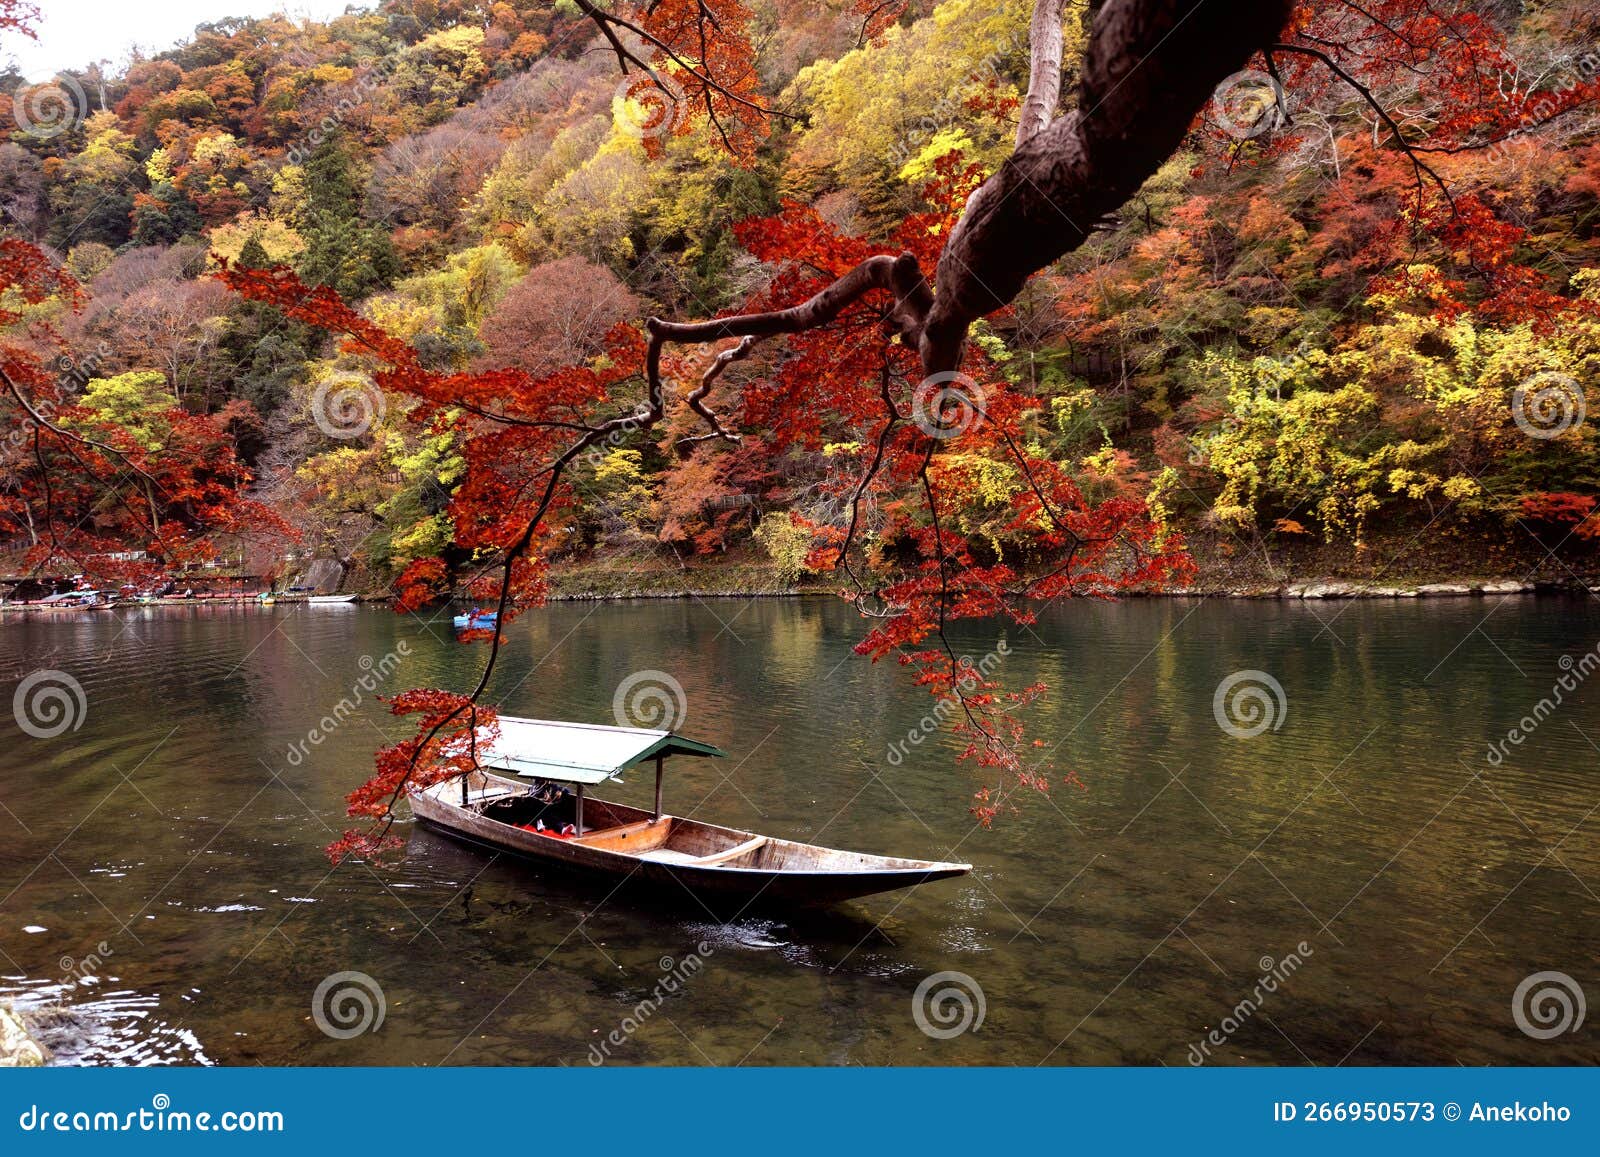 traditional touris travel boat on the river in kyoto city with autumn season background